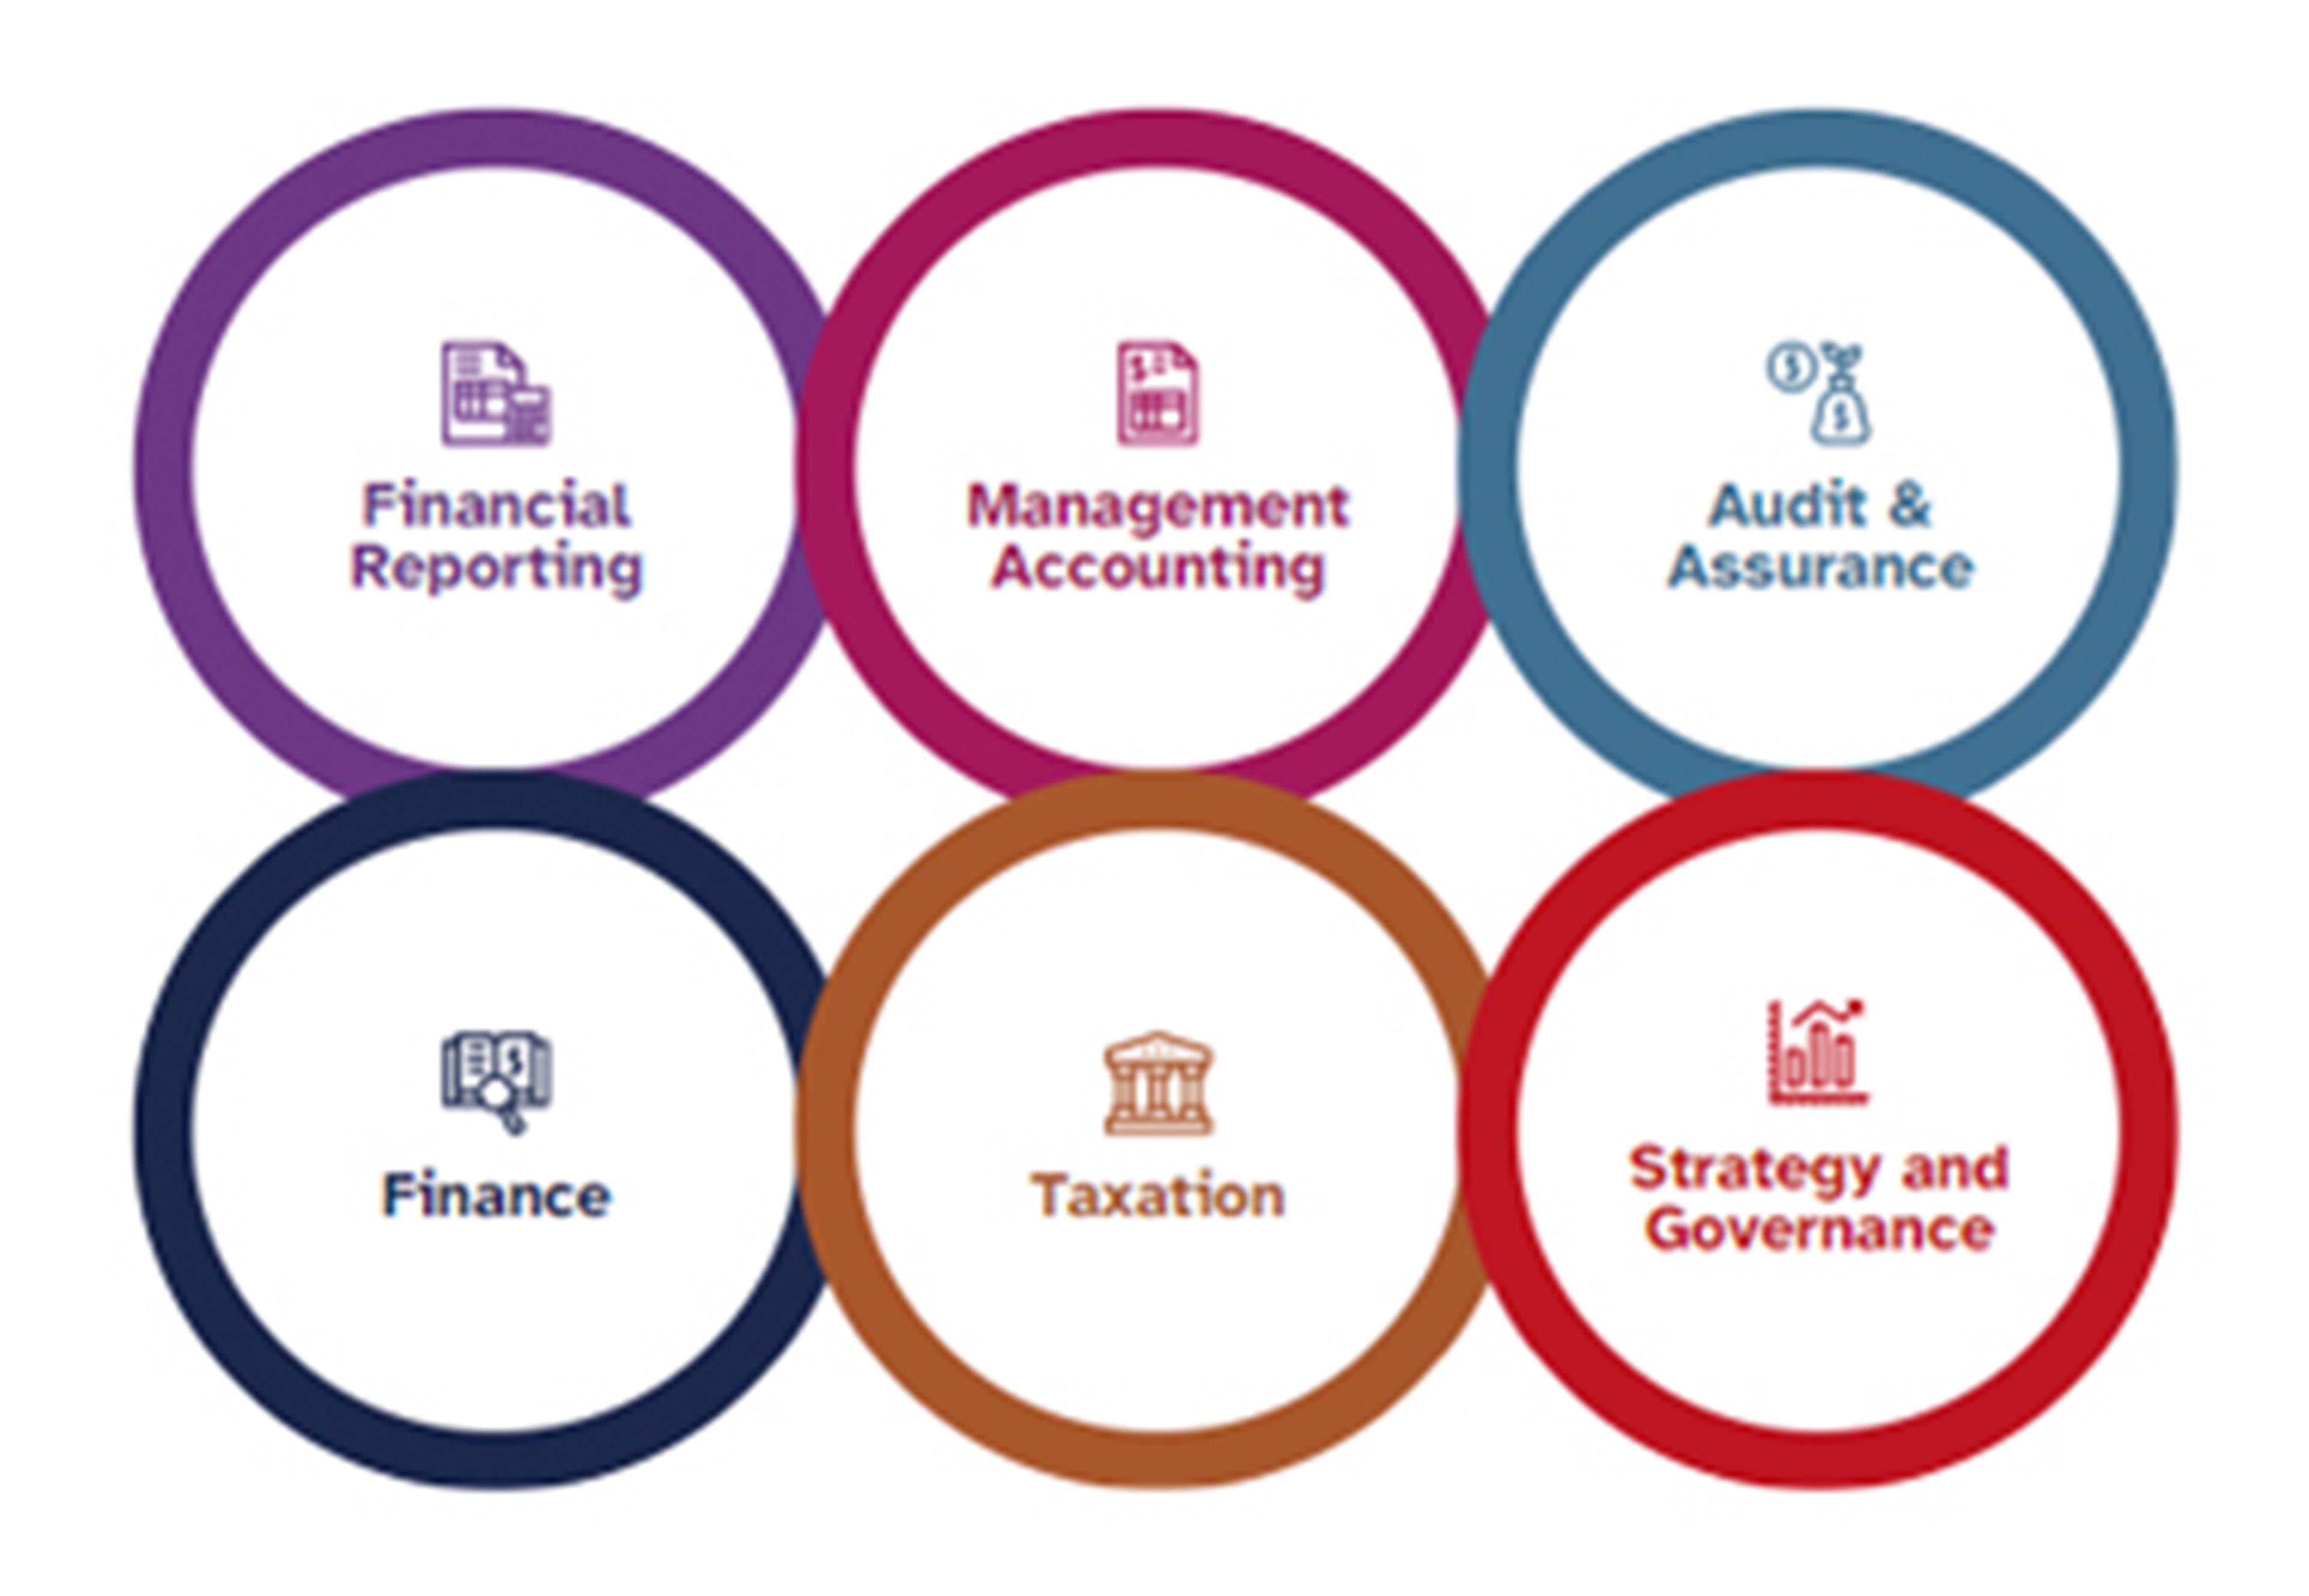 Six rings stacked three in a row encircling from left to right logo and text, financial reporting, management accounting, audit and assurance, finance, taxation and, strategy and governance